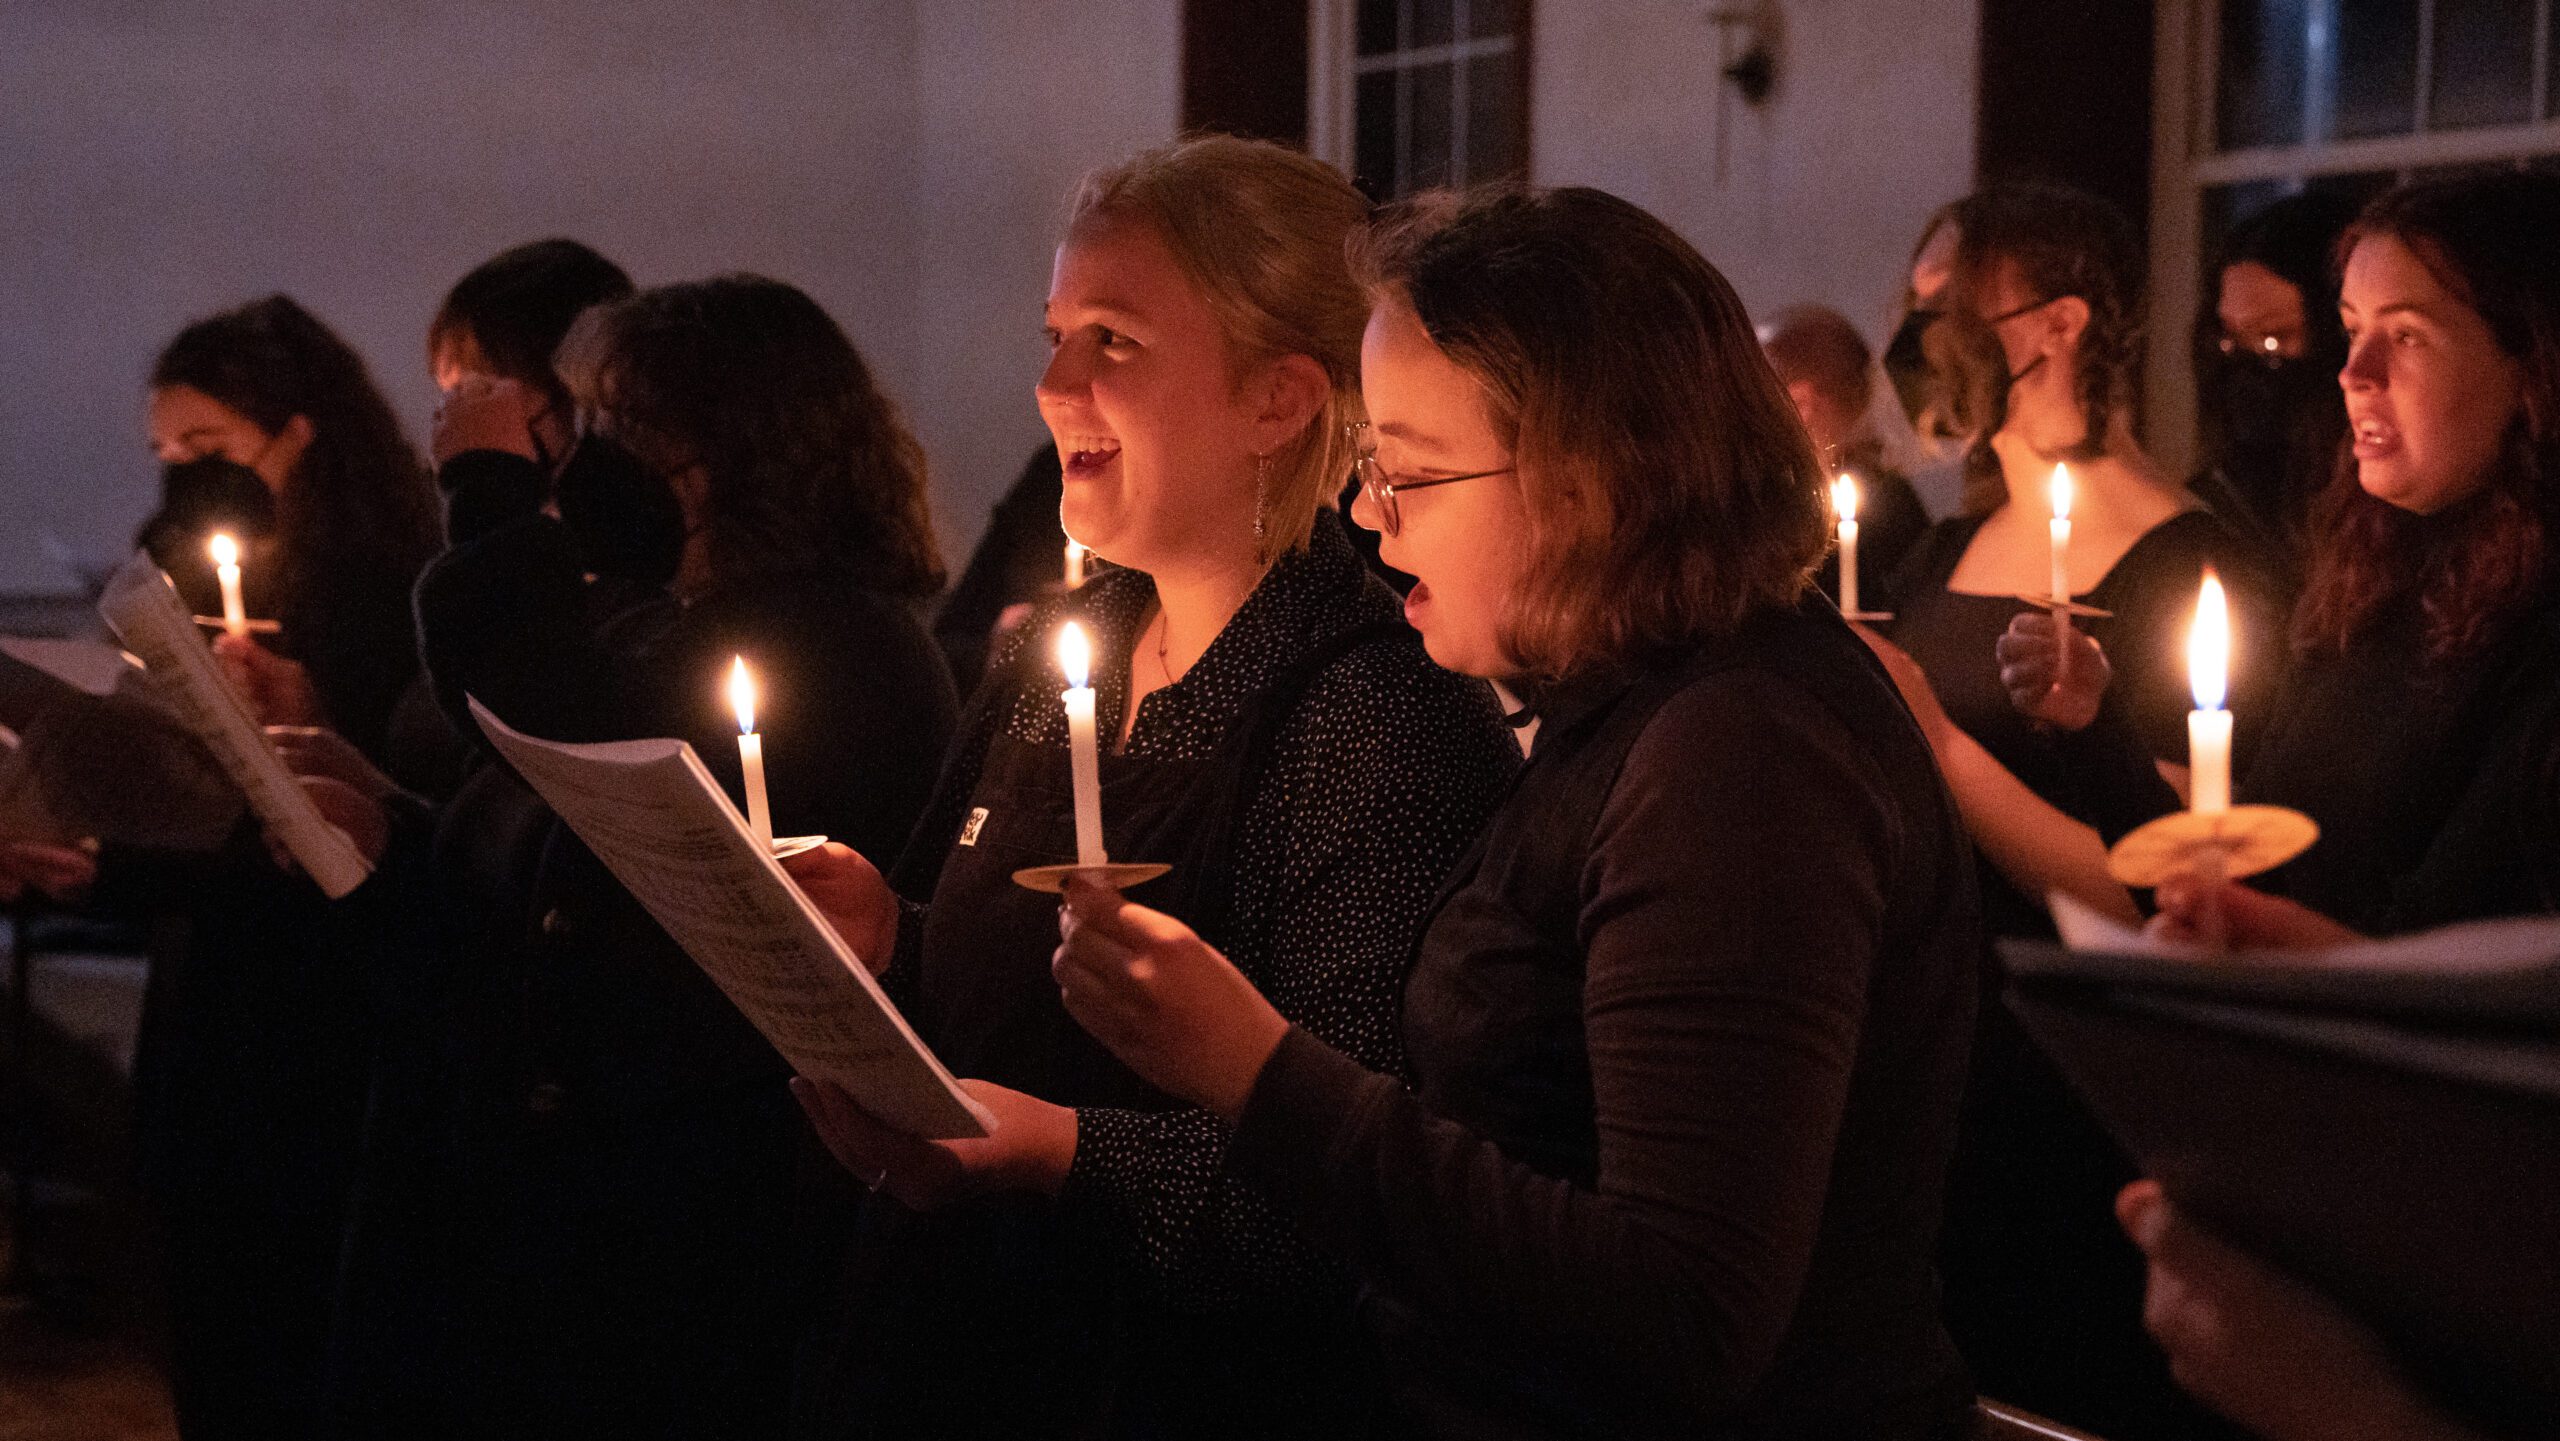 "Silent night, Holy night" is sung at the Christmas Candlelight Service.